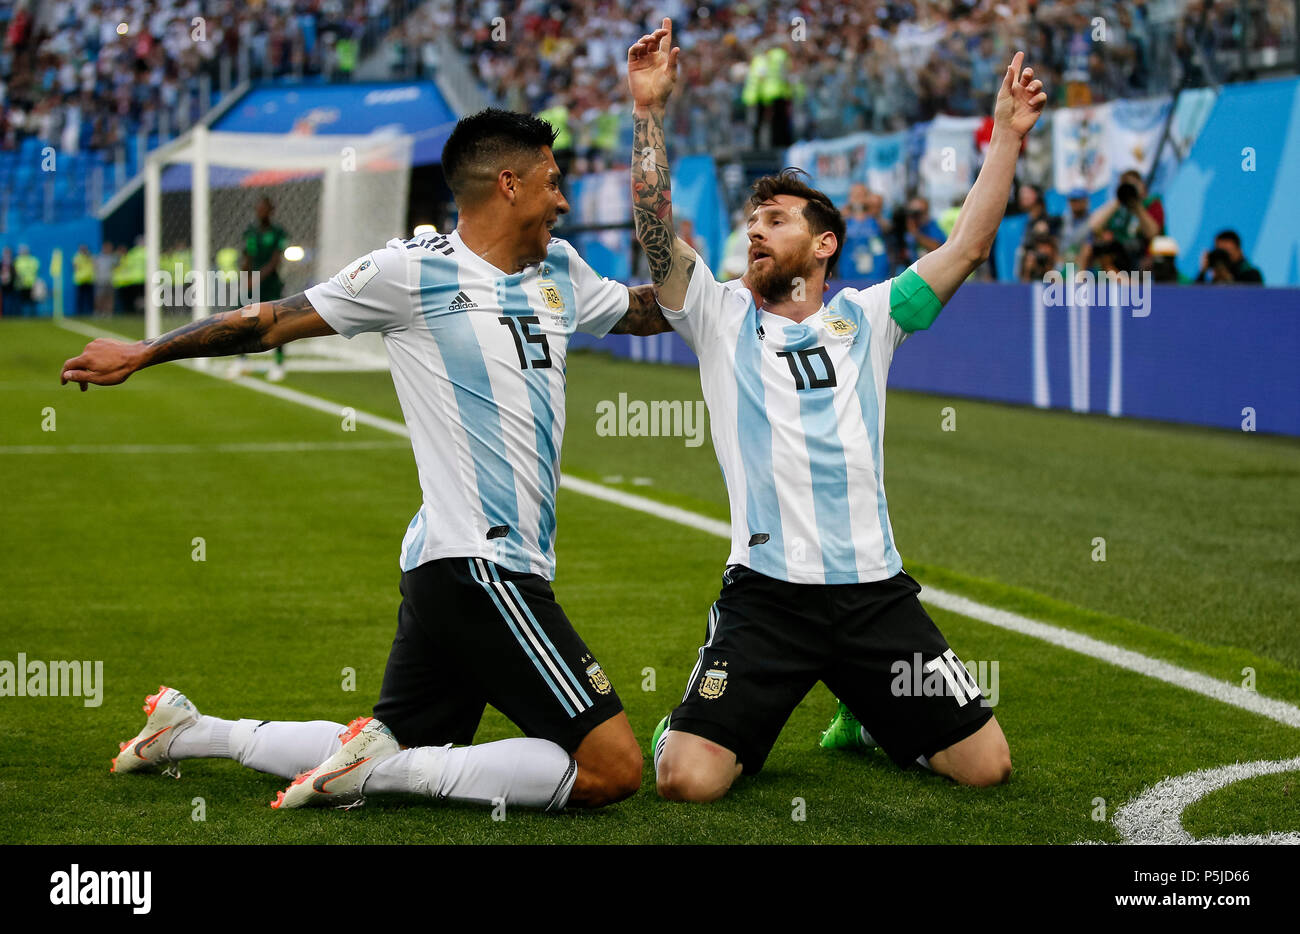 St Petersburg, Russia, 27 June 2018. Lionel Messi of Argentina celebrates with Enzo Perez of Argentina after scoring his side's first goal to make the score 1-0 during the 2018 FIFA World Cup Group D match between Nigeria and Argentina at Saint Petersburg Stadium on June 26th 2018 in Saint Petersburg, Russia. (Photo by Daniel Chesterton/phcimages.com) Credit: PHC Images/Alamy Live News Stock Photo